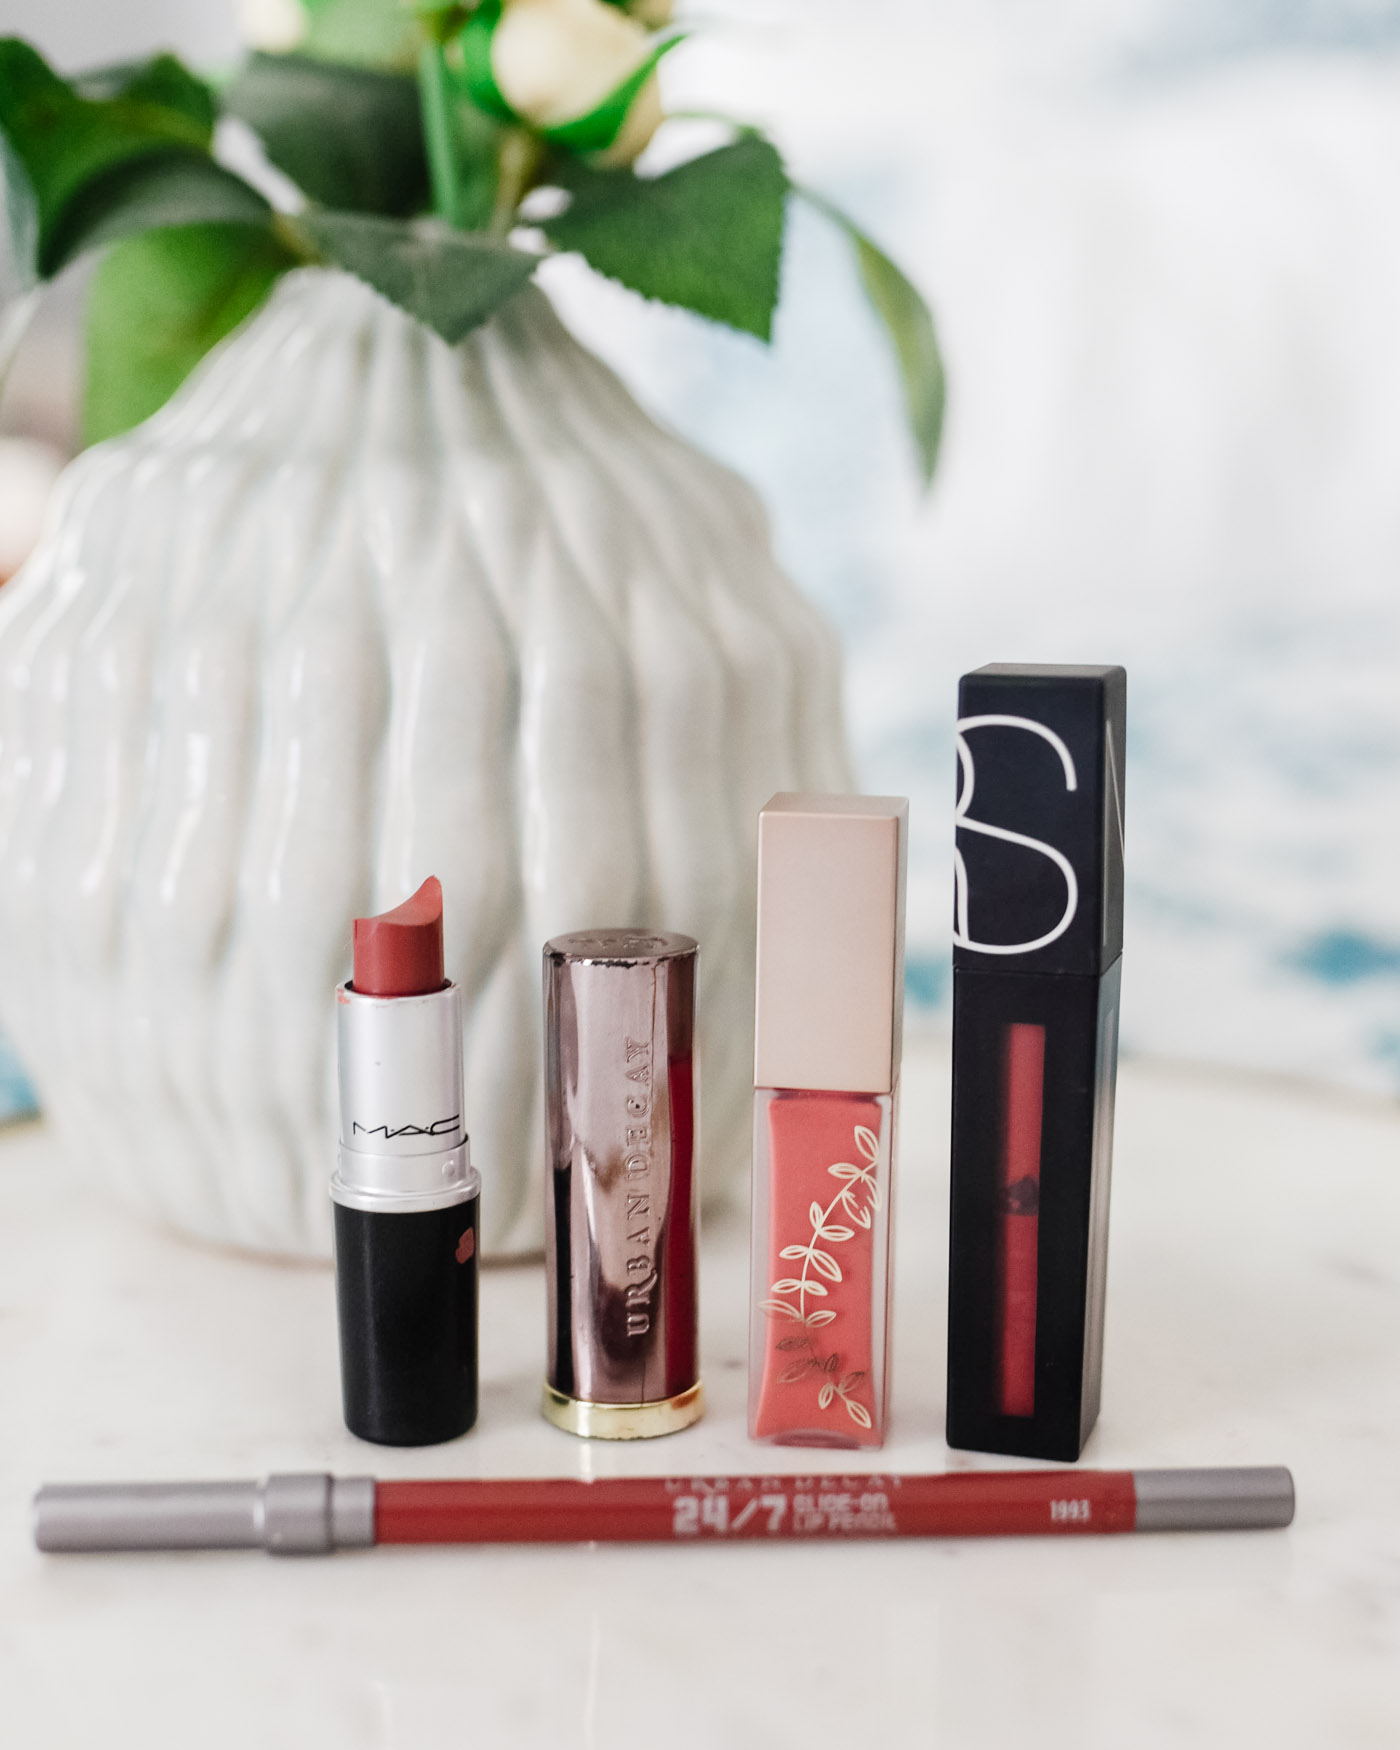 Morning Skin Care Routine by popular Memphis beauty blog, Lone Star Looking Glass: image of MAC lipstick, Urban Decay lipstick, Urban Decay 24/7 glide on lip pencil, and Nars powermatte lip pigment next to a white flower vase.  